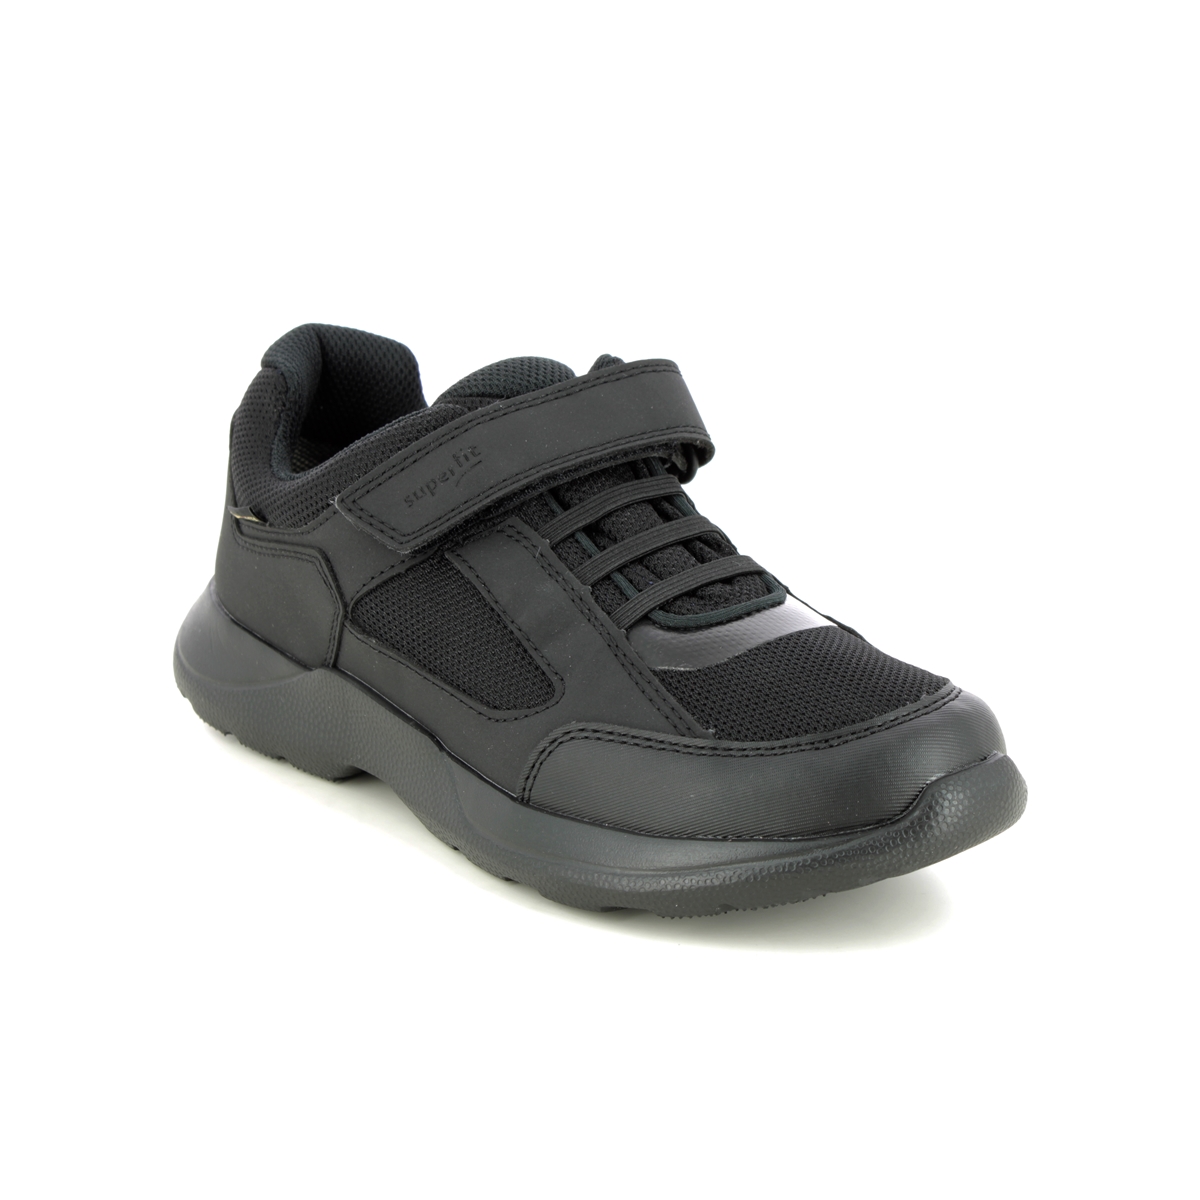 Superfit Rush Gtx Bungee Black Kids Trainers 1006223-0000 In Size 36 In Plain Black For kids